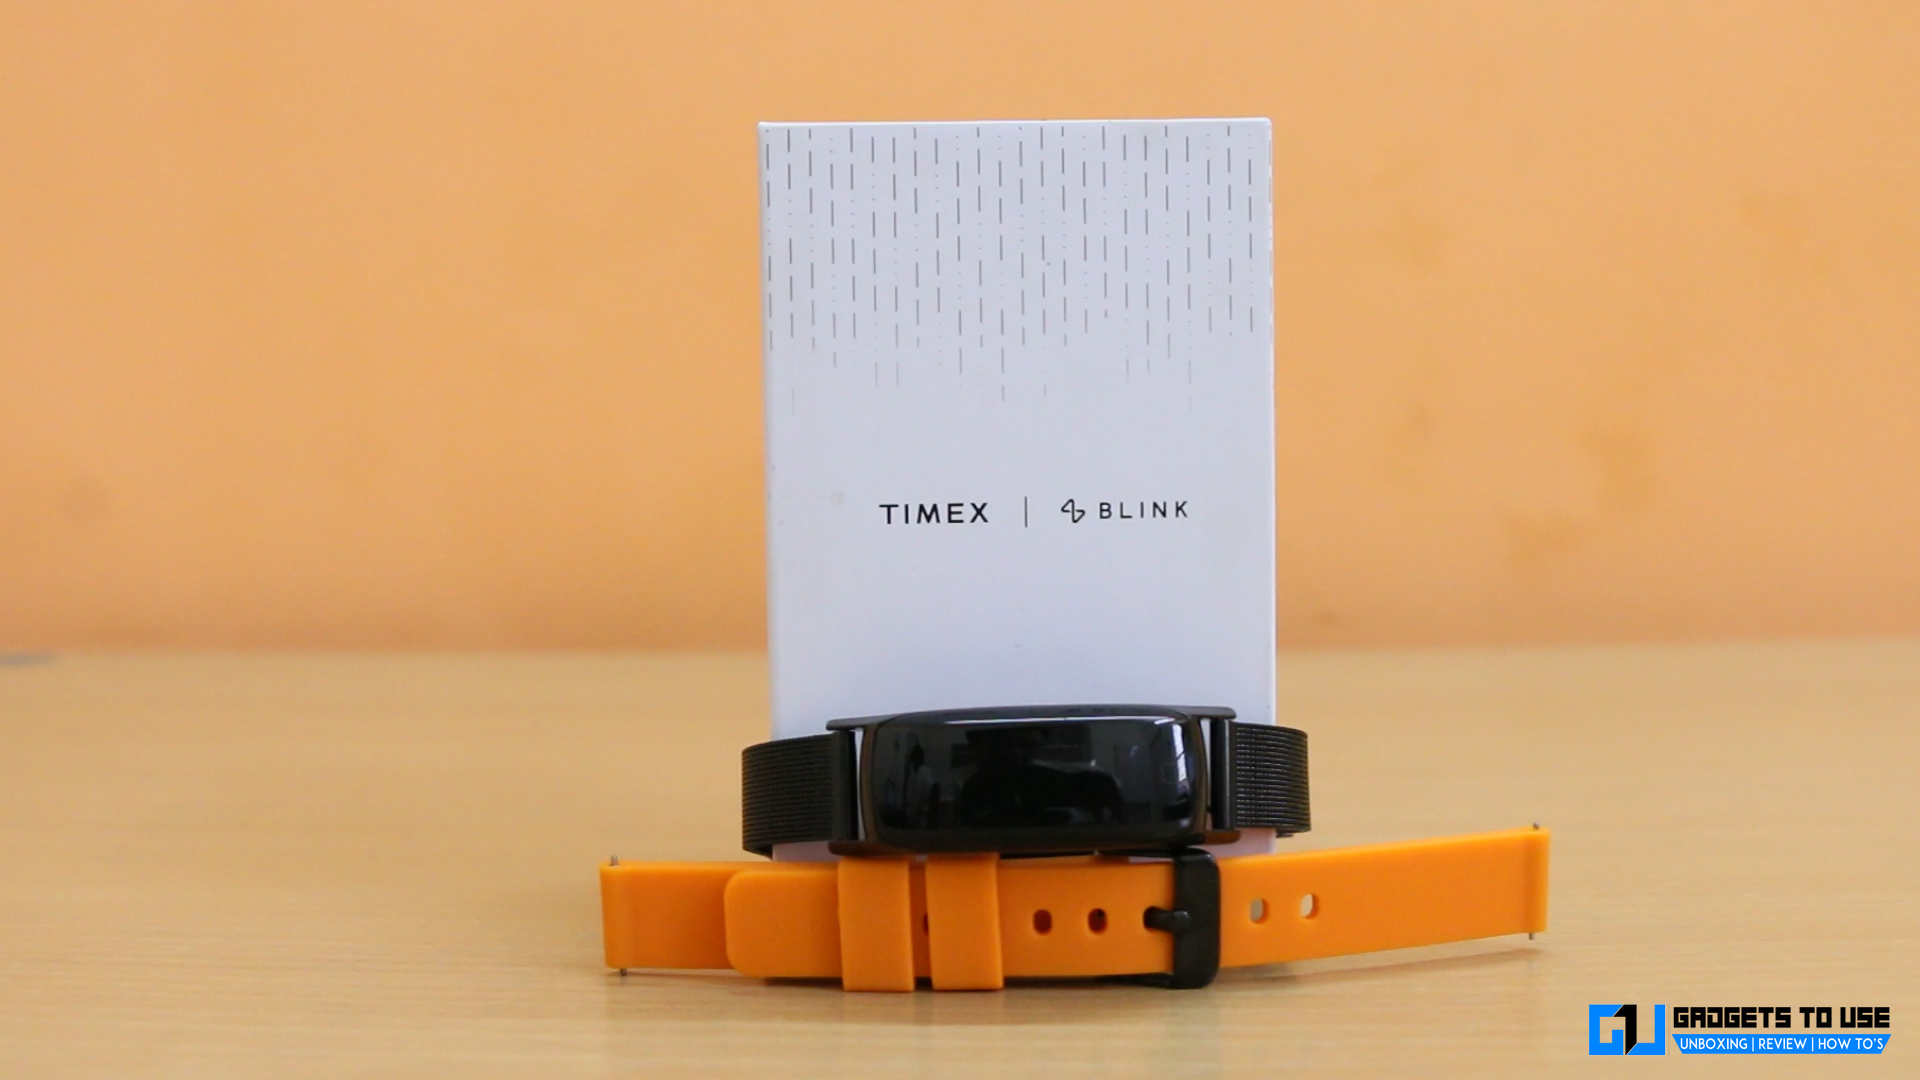 Timex Blink band featured